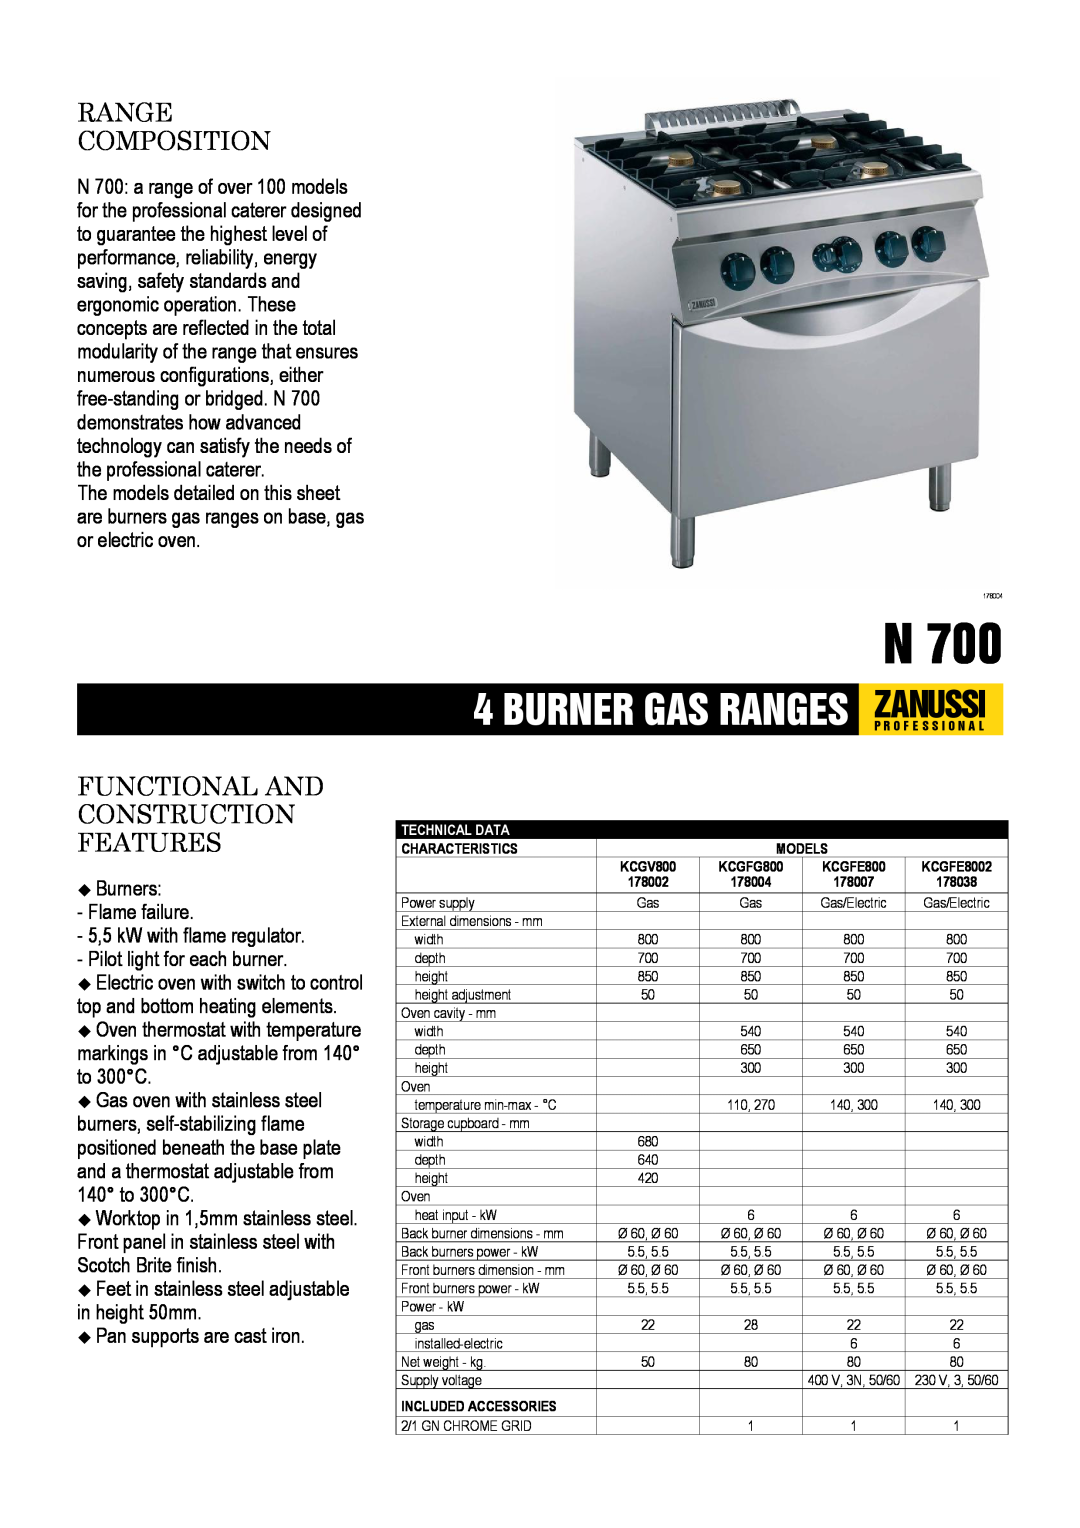 Zanussi KCGFE8002, KCGV800, KCGFG800, 178007, 178002 dimensions Range Composition, Functional And Construction Features 